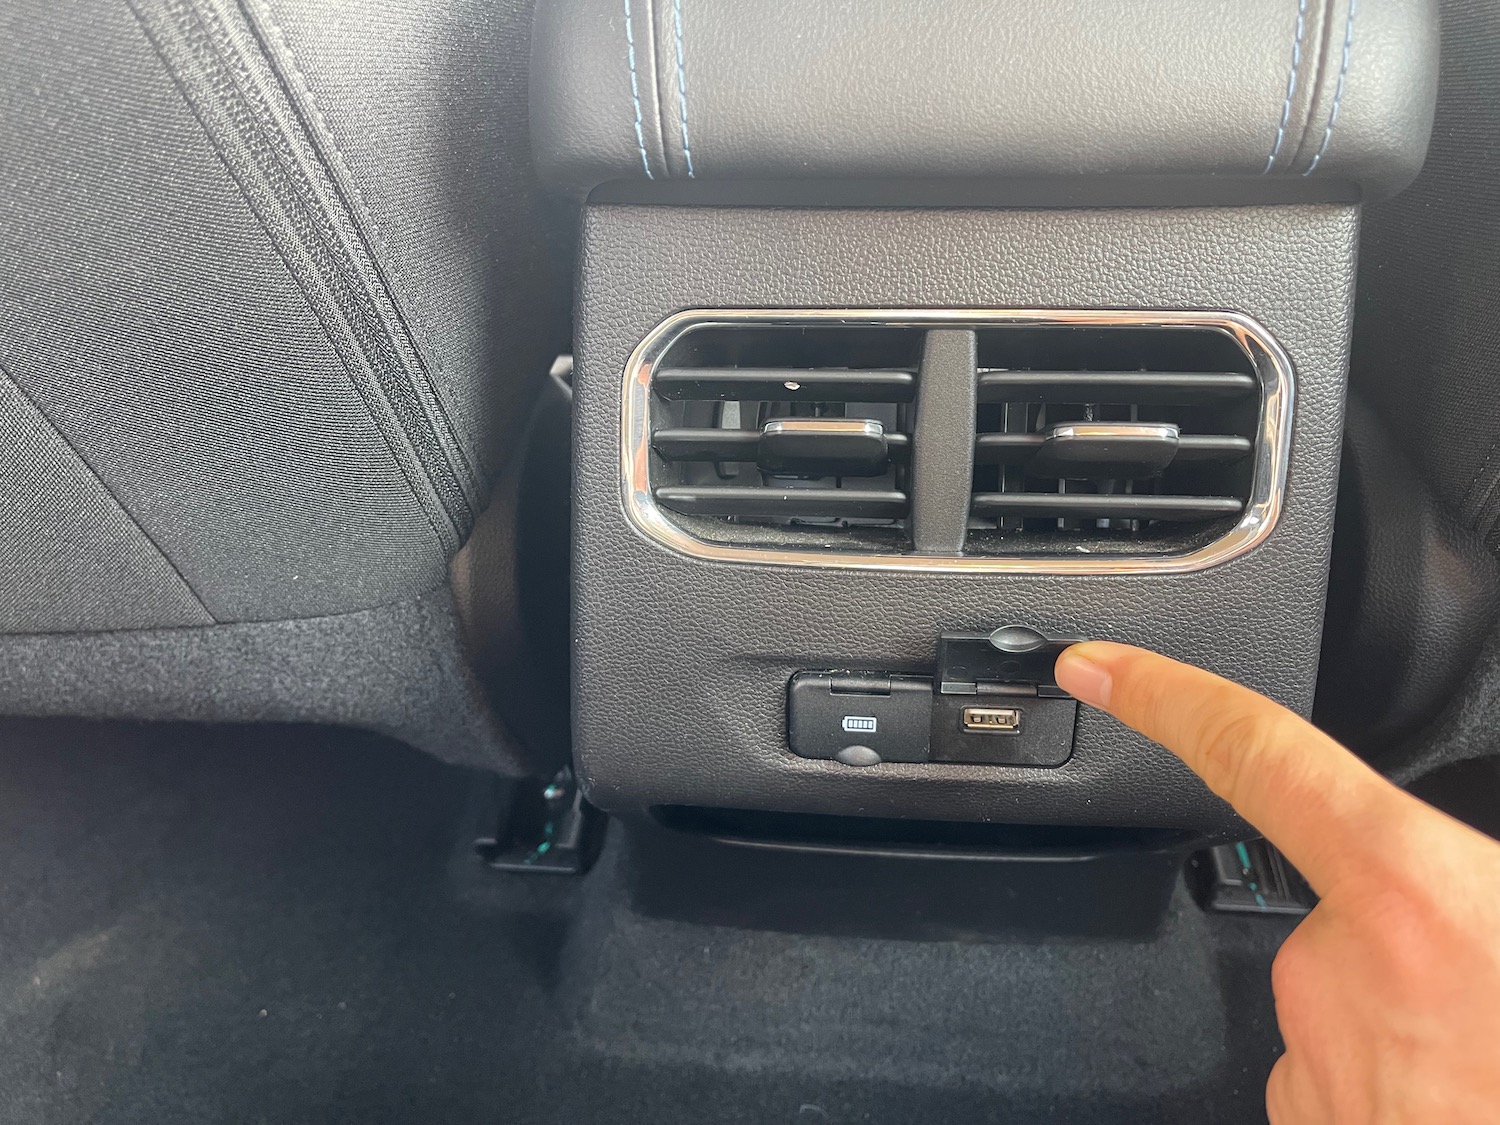 a finger pressing a button on a car vent